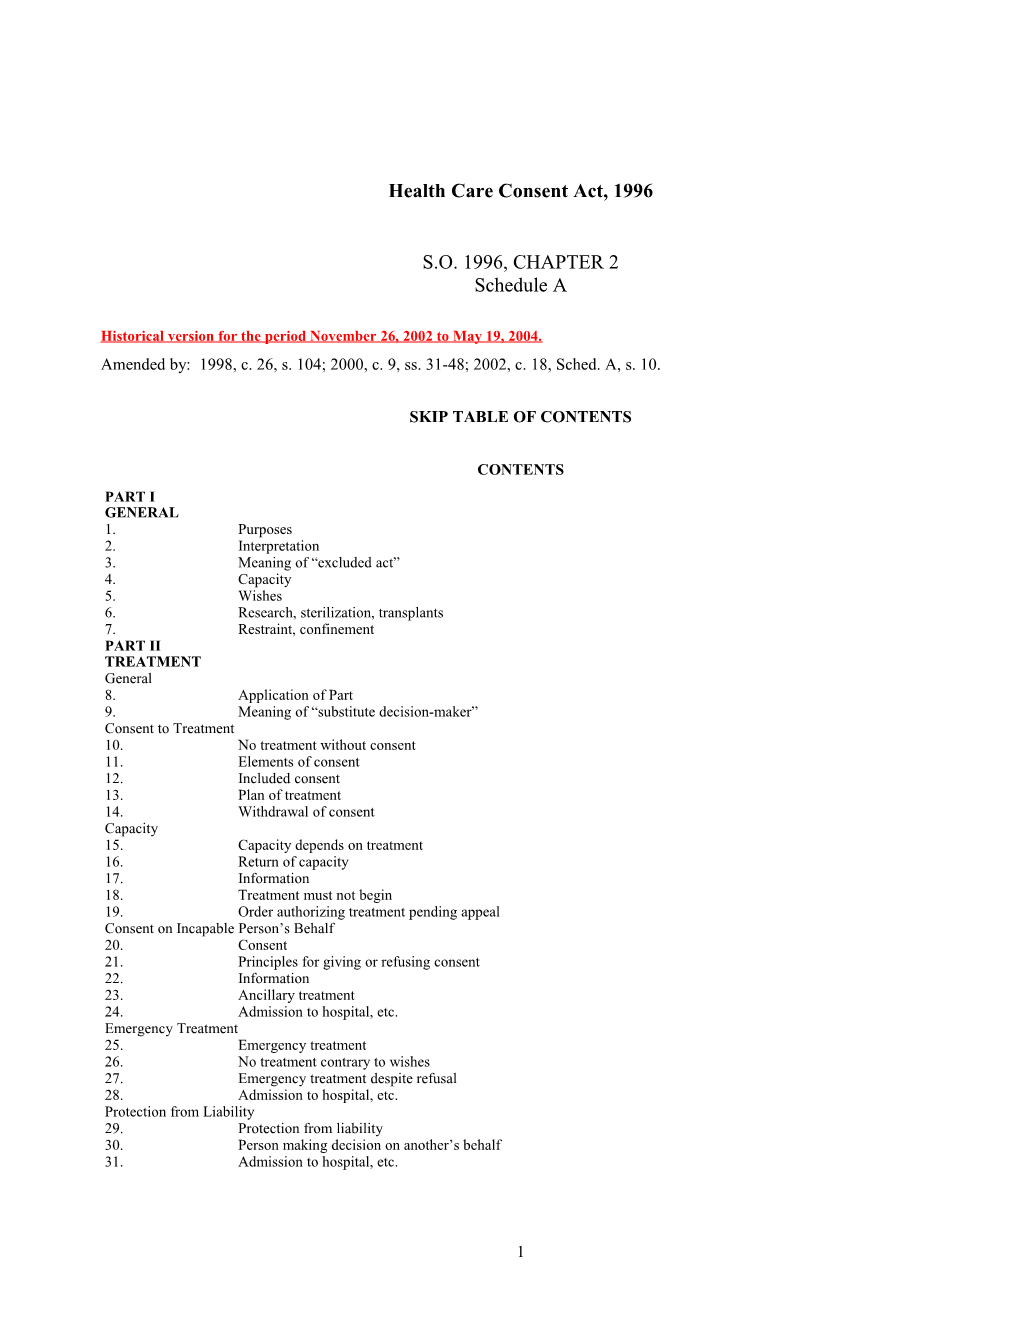 Health Care Consent Act, 1996, S.O. 1996, C. 2, Sched. A